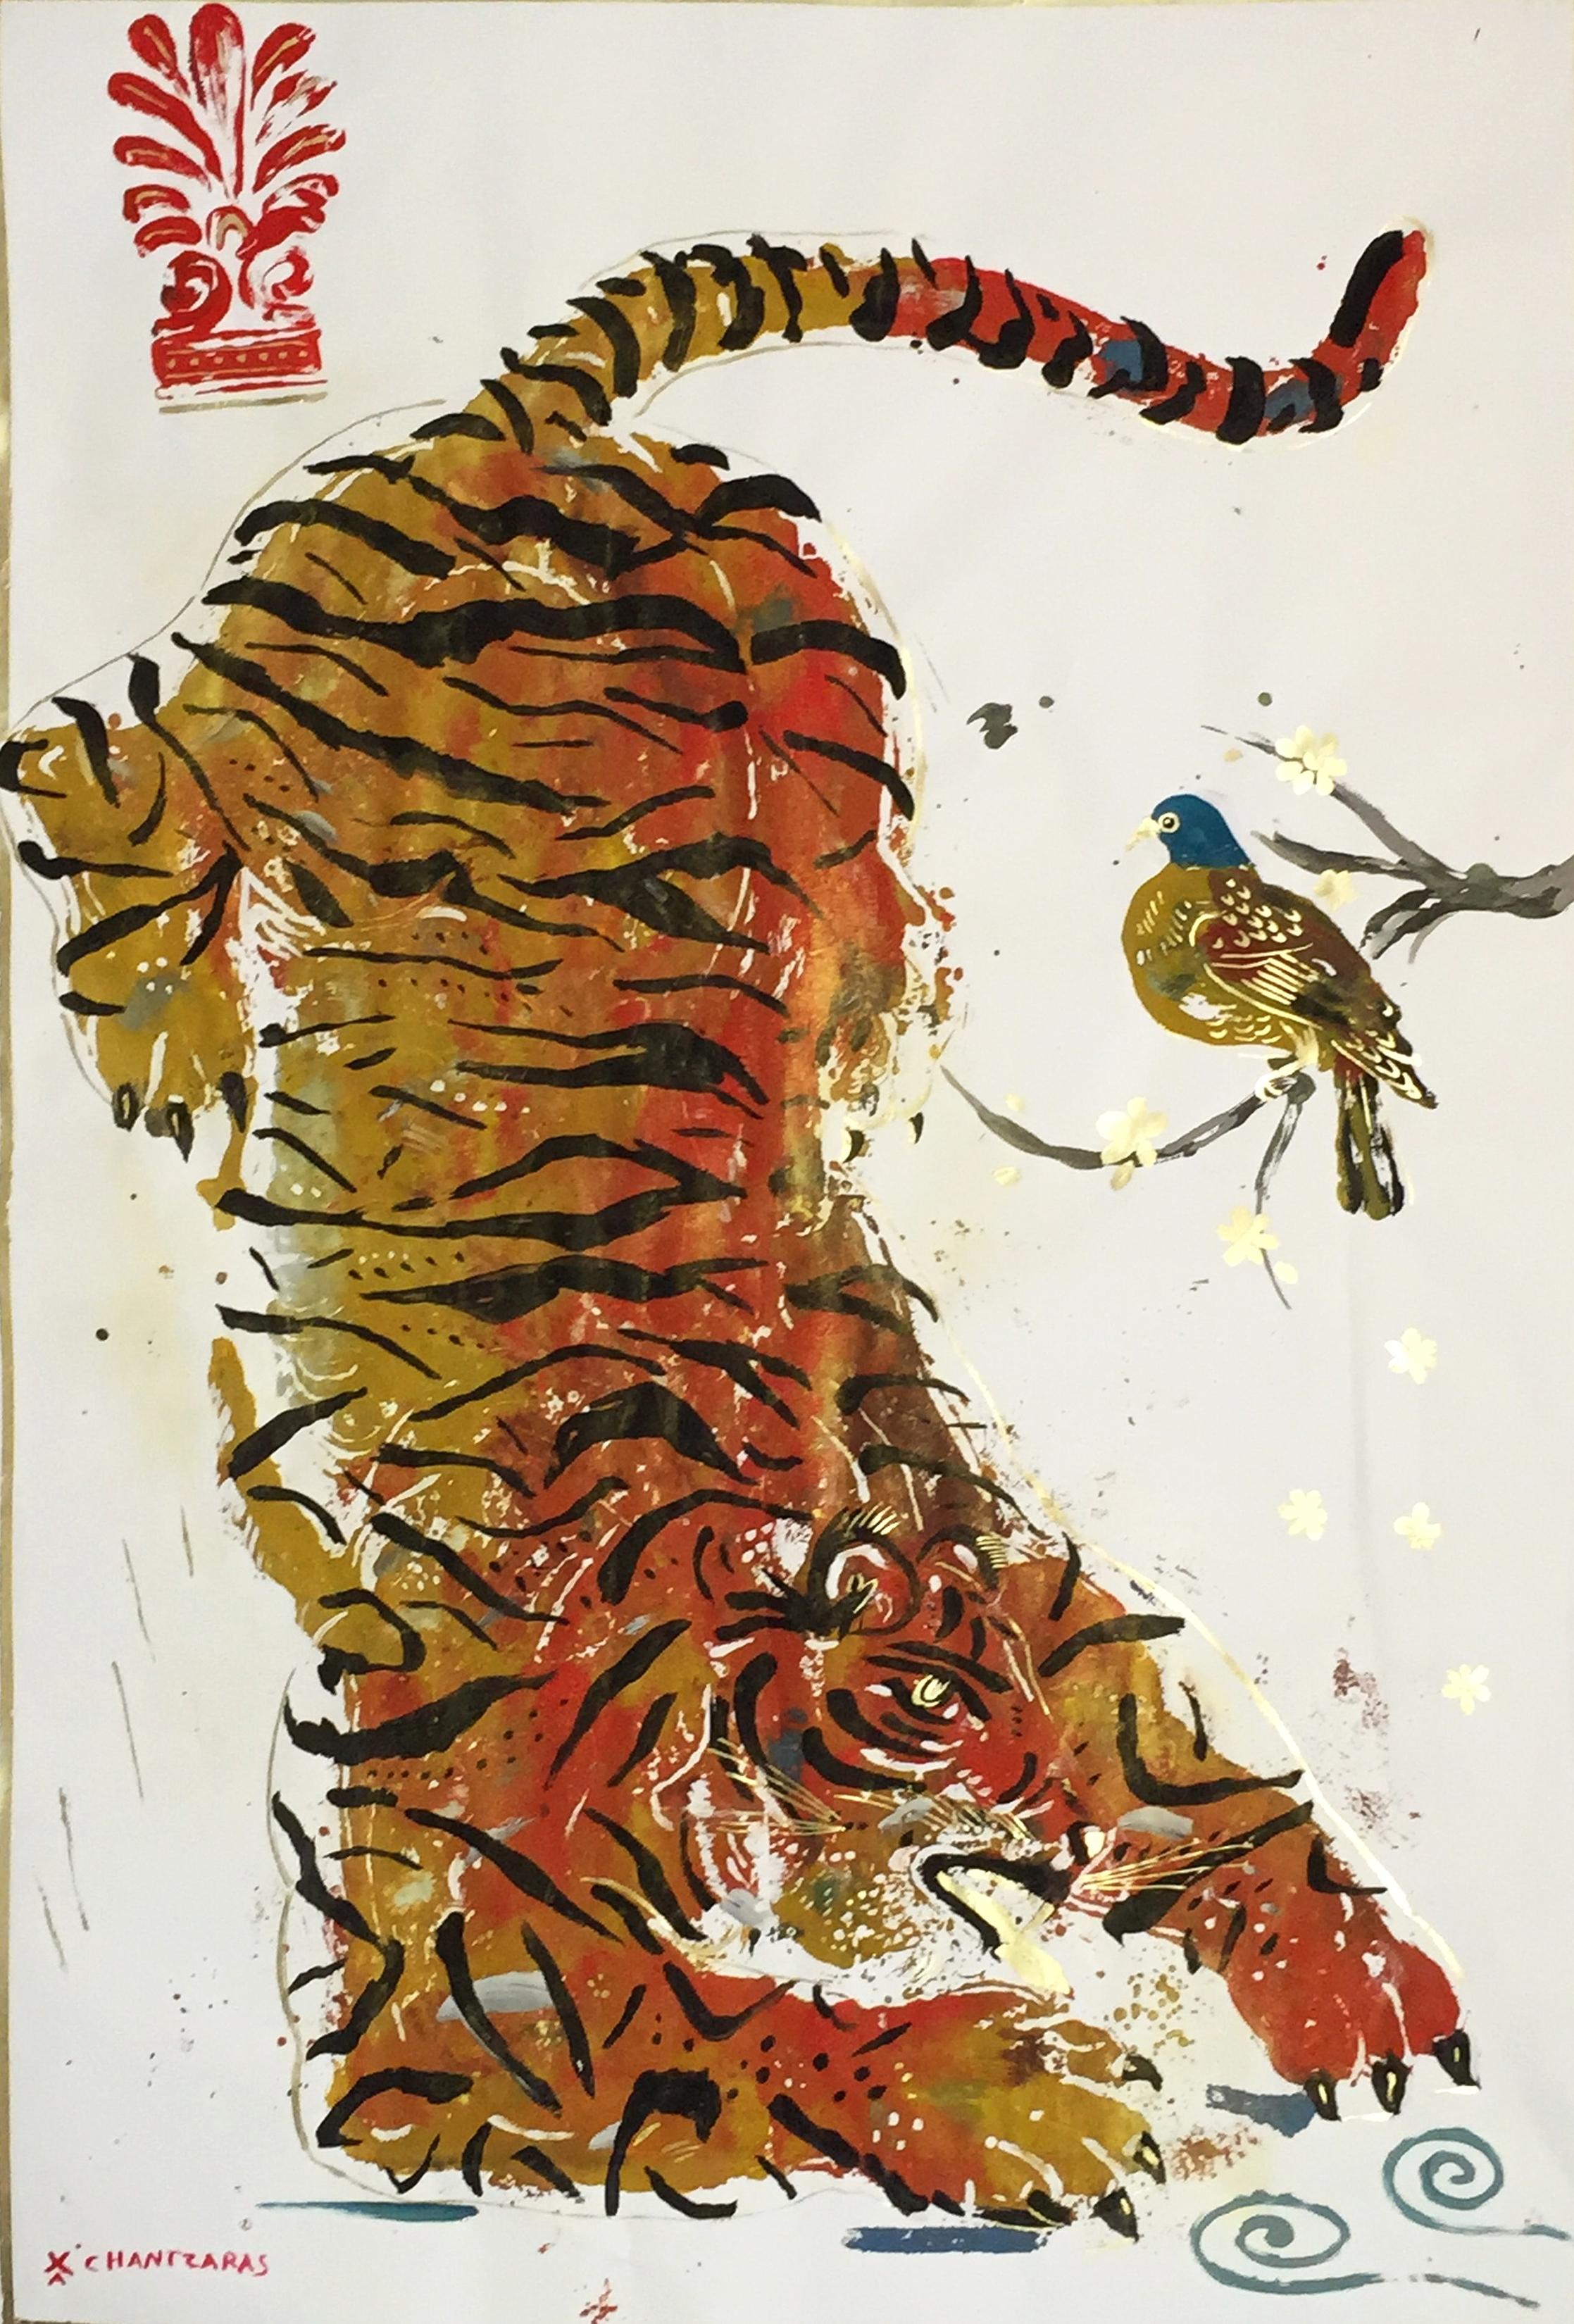 Apostolos Chantzaras Animal Art - The Hunt, Tiger, Acrylic paint and gold leaf on Fabriano paper